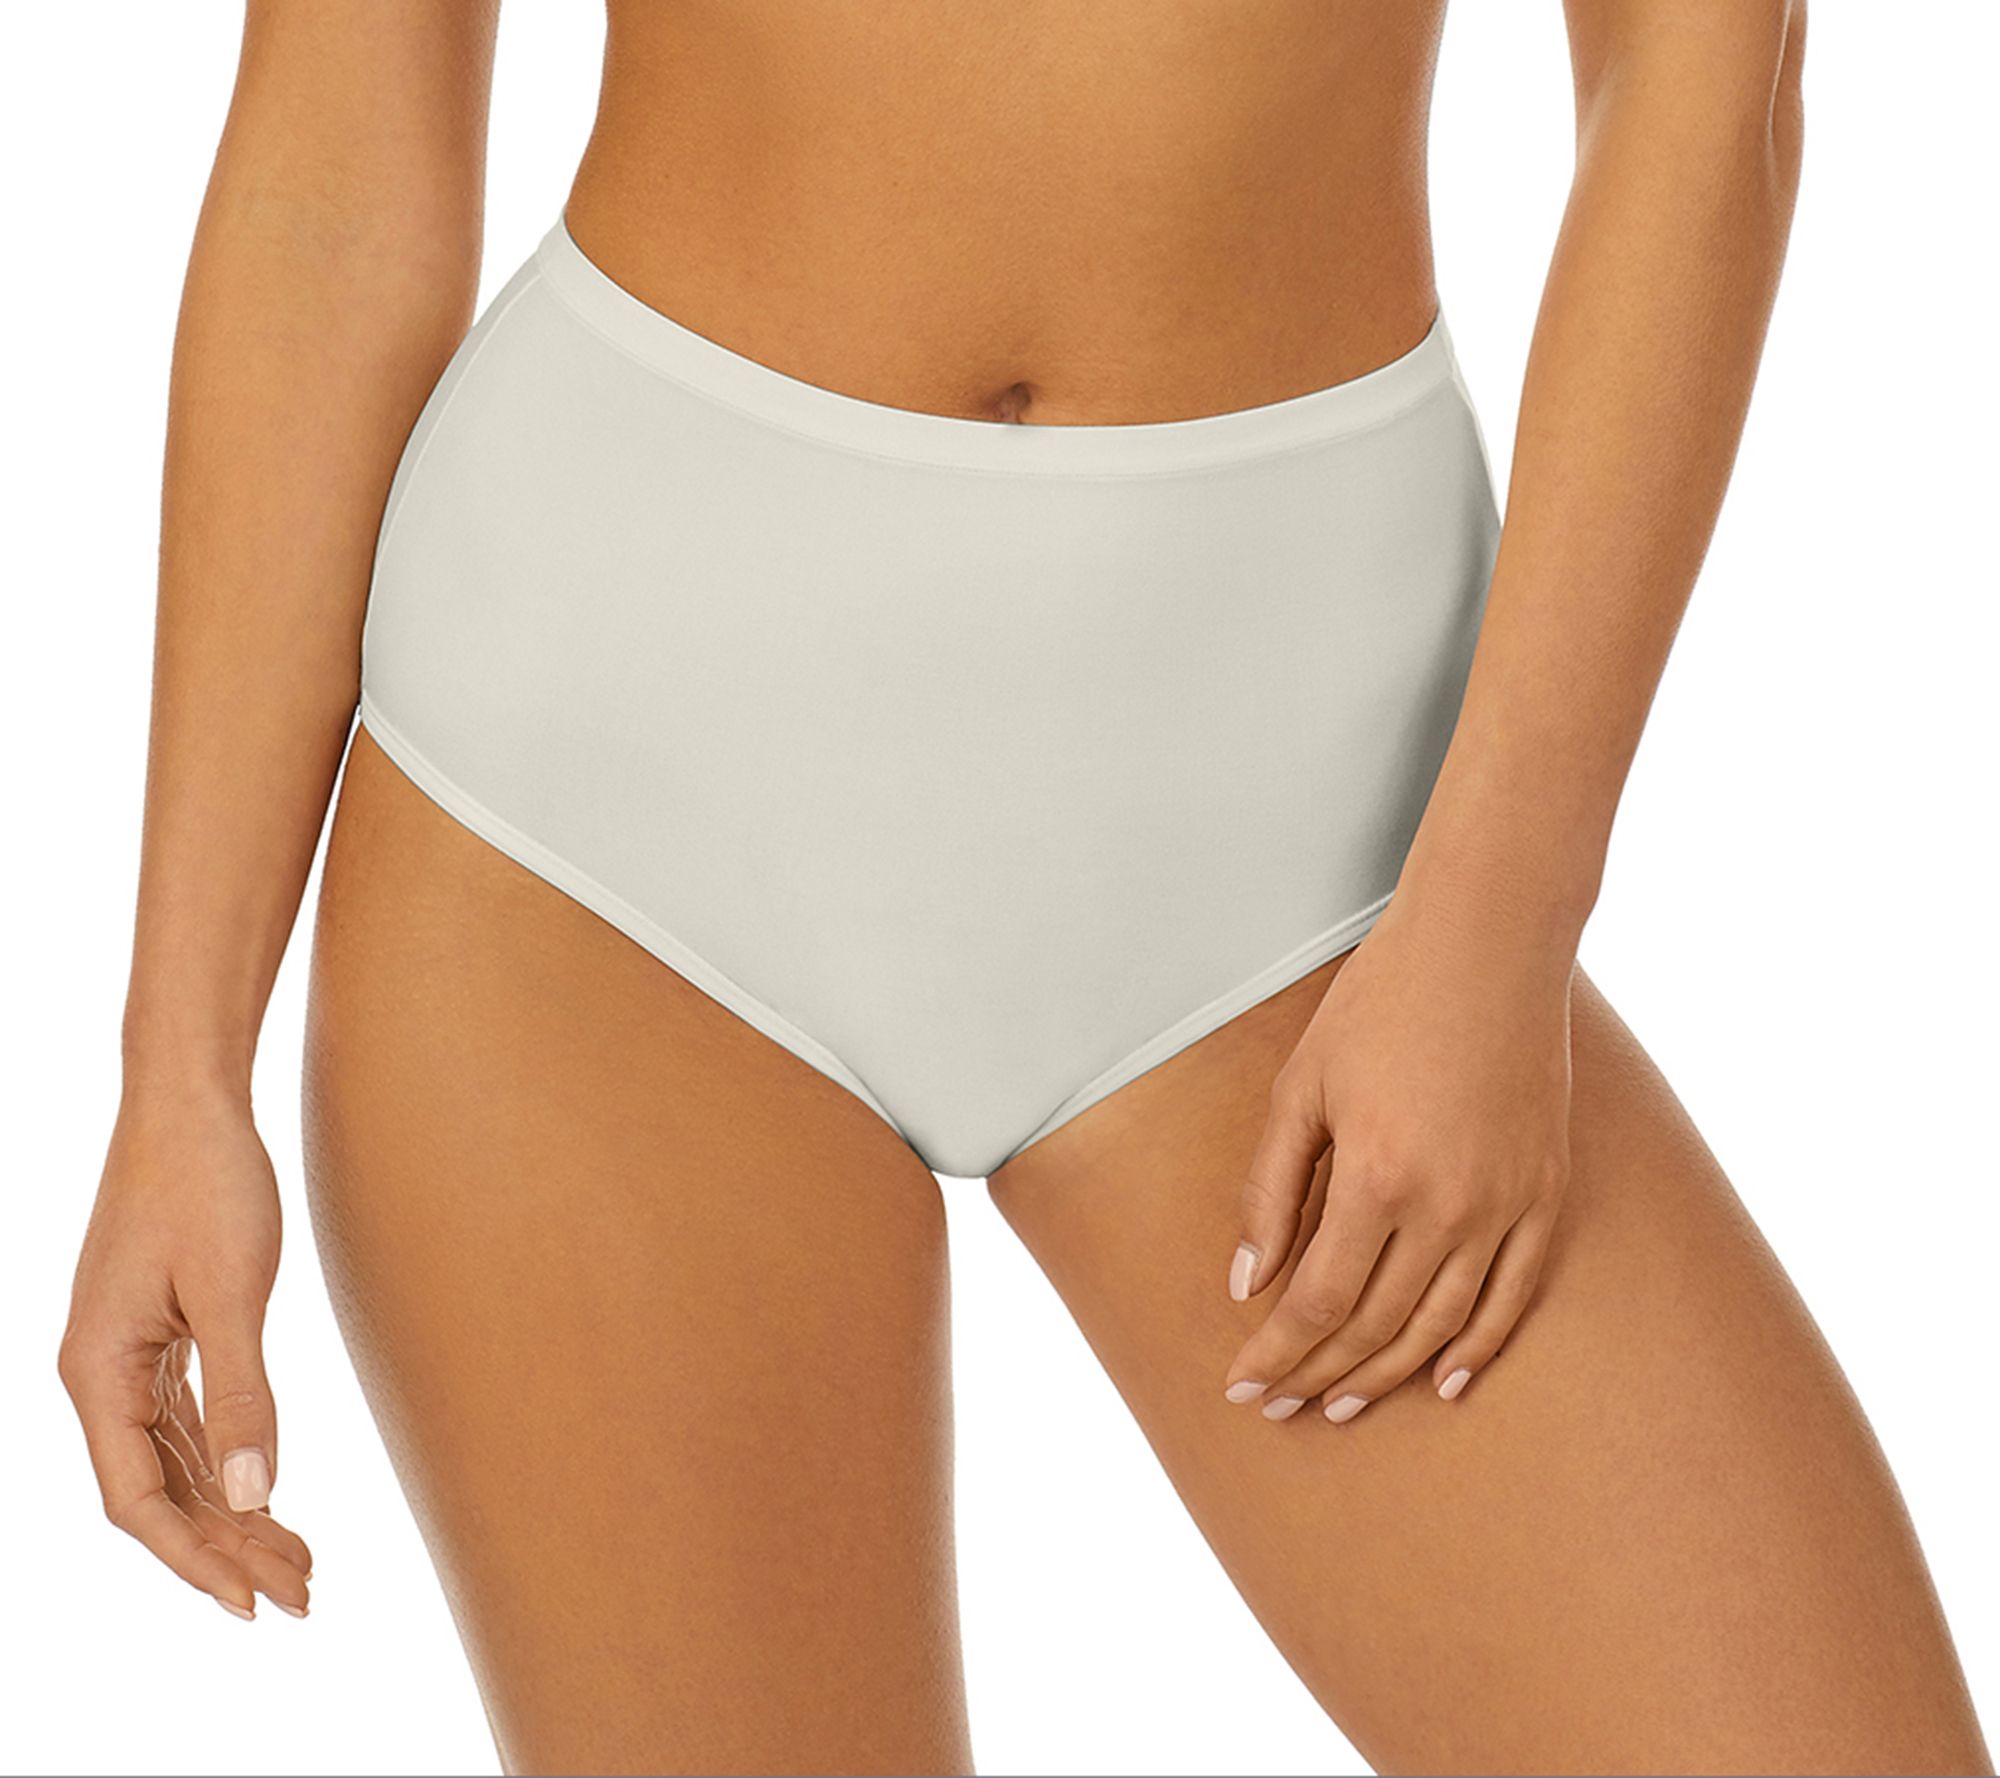 How to Add a Pad to Underwear – thriftyinnovations